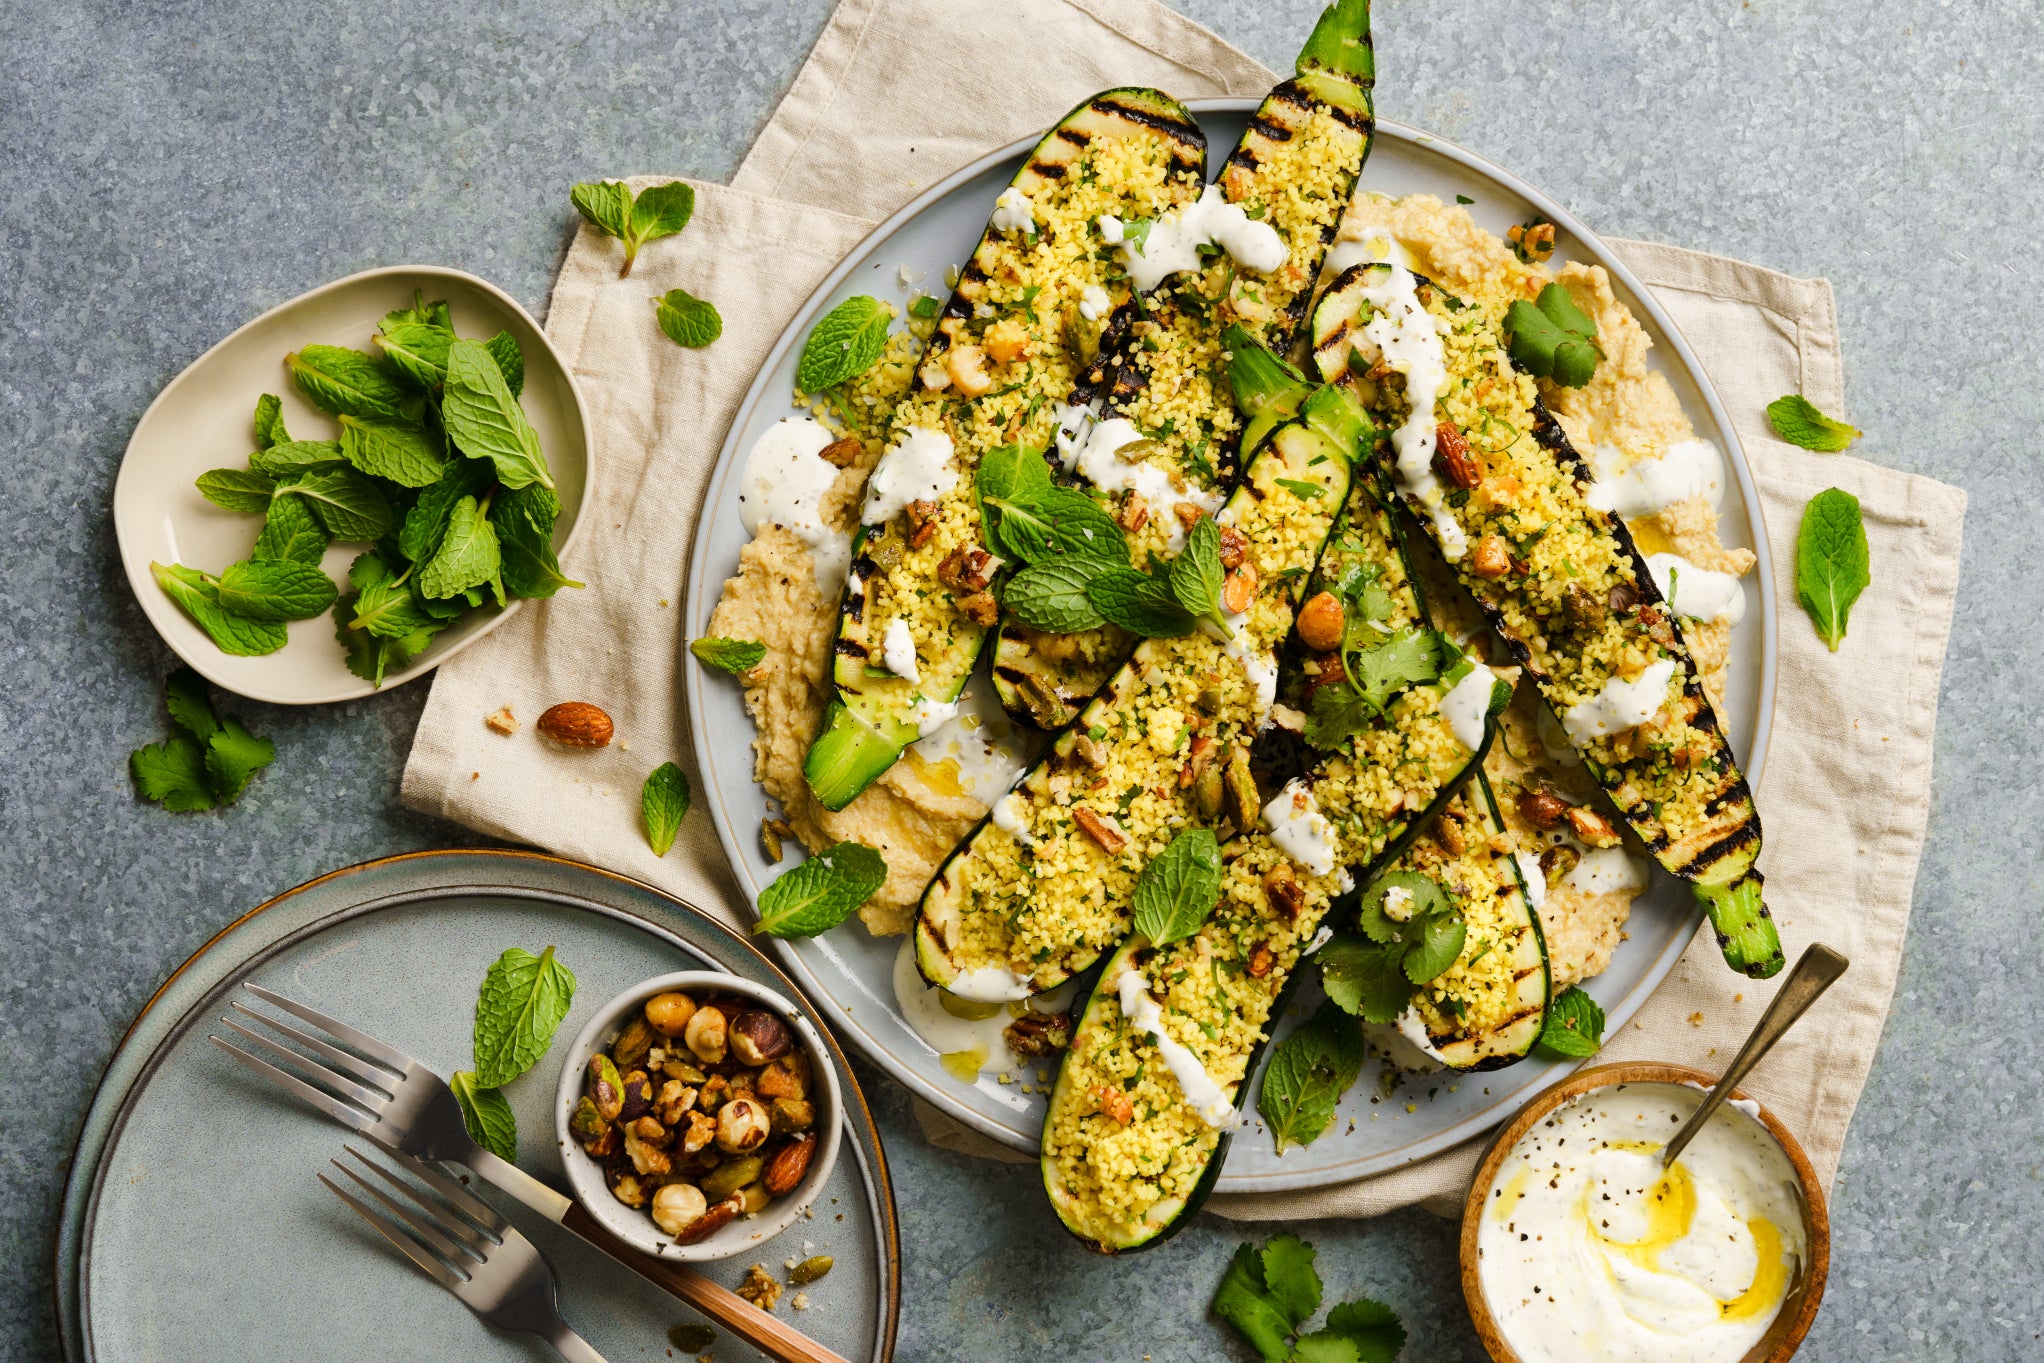 An image of zucchini stuffed with couscous surrounded by little bowls of herbs and yoghurt